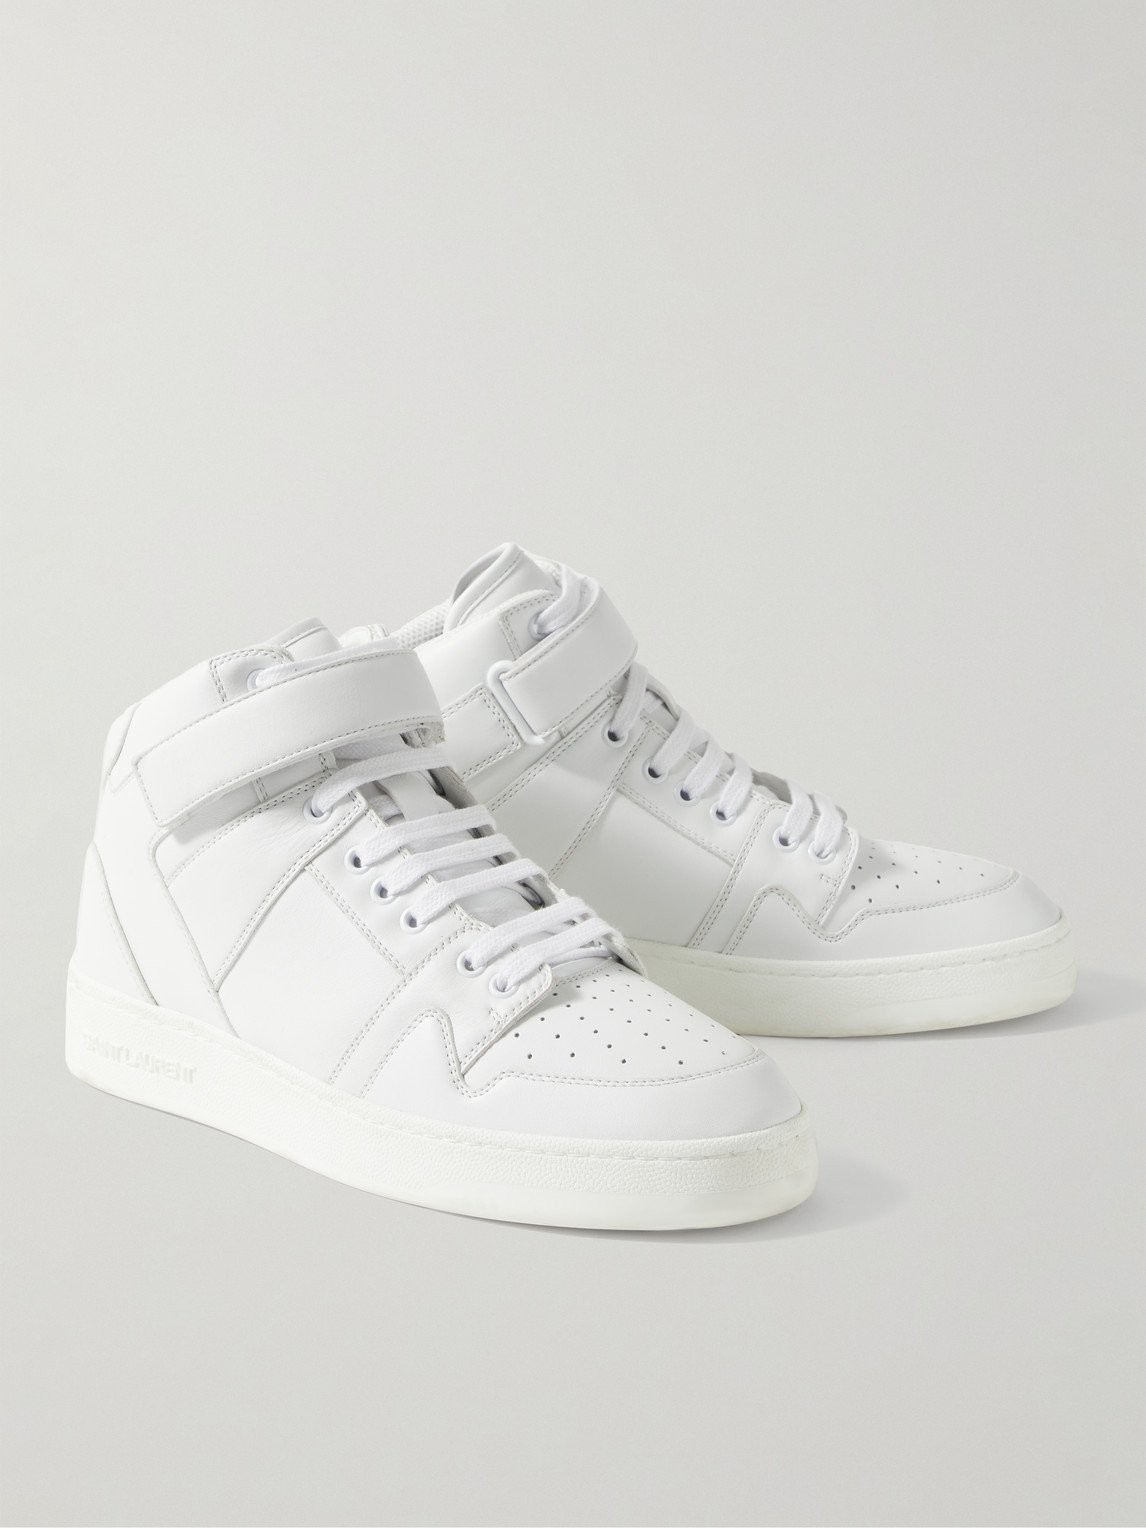 Shop Saint Laurent Greenwich Leather High-top Sneakers In White